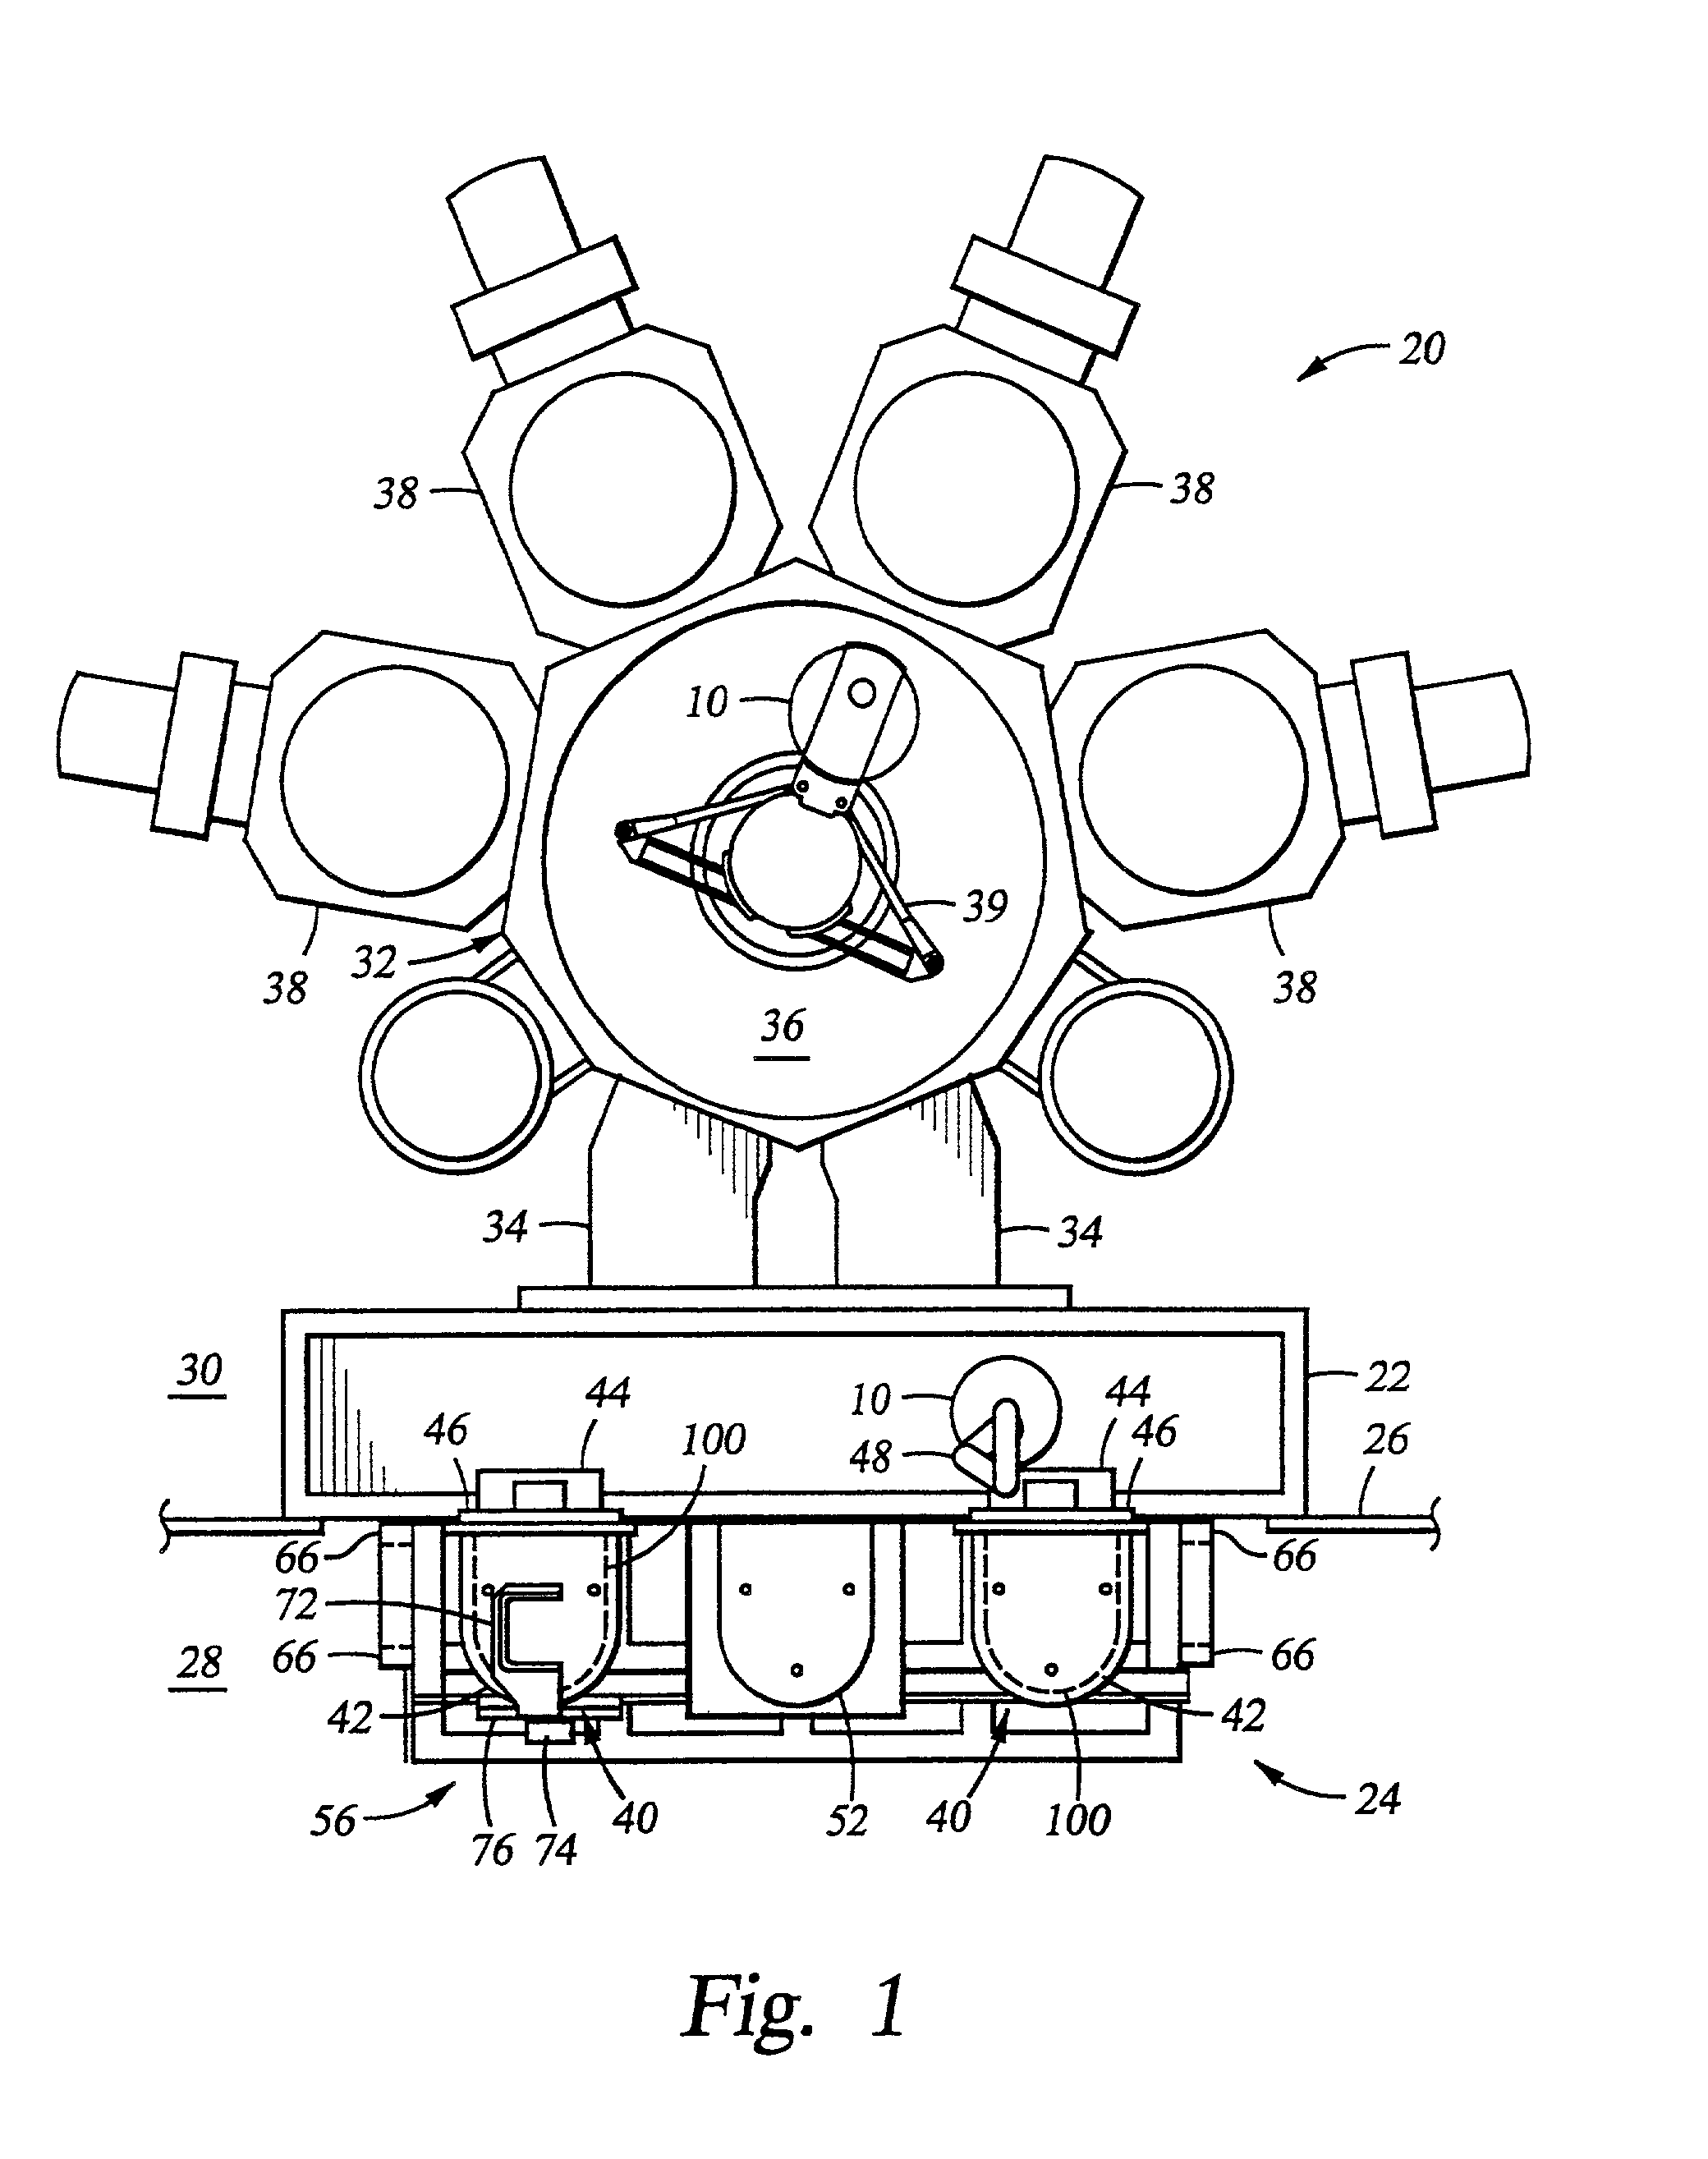 Apparatus for storing and moving a cassette